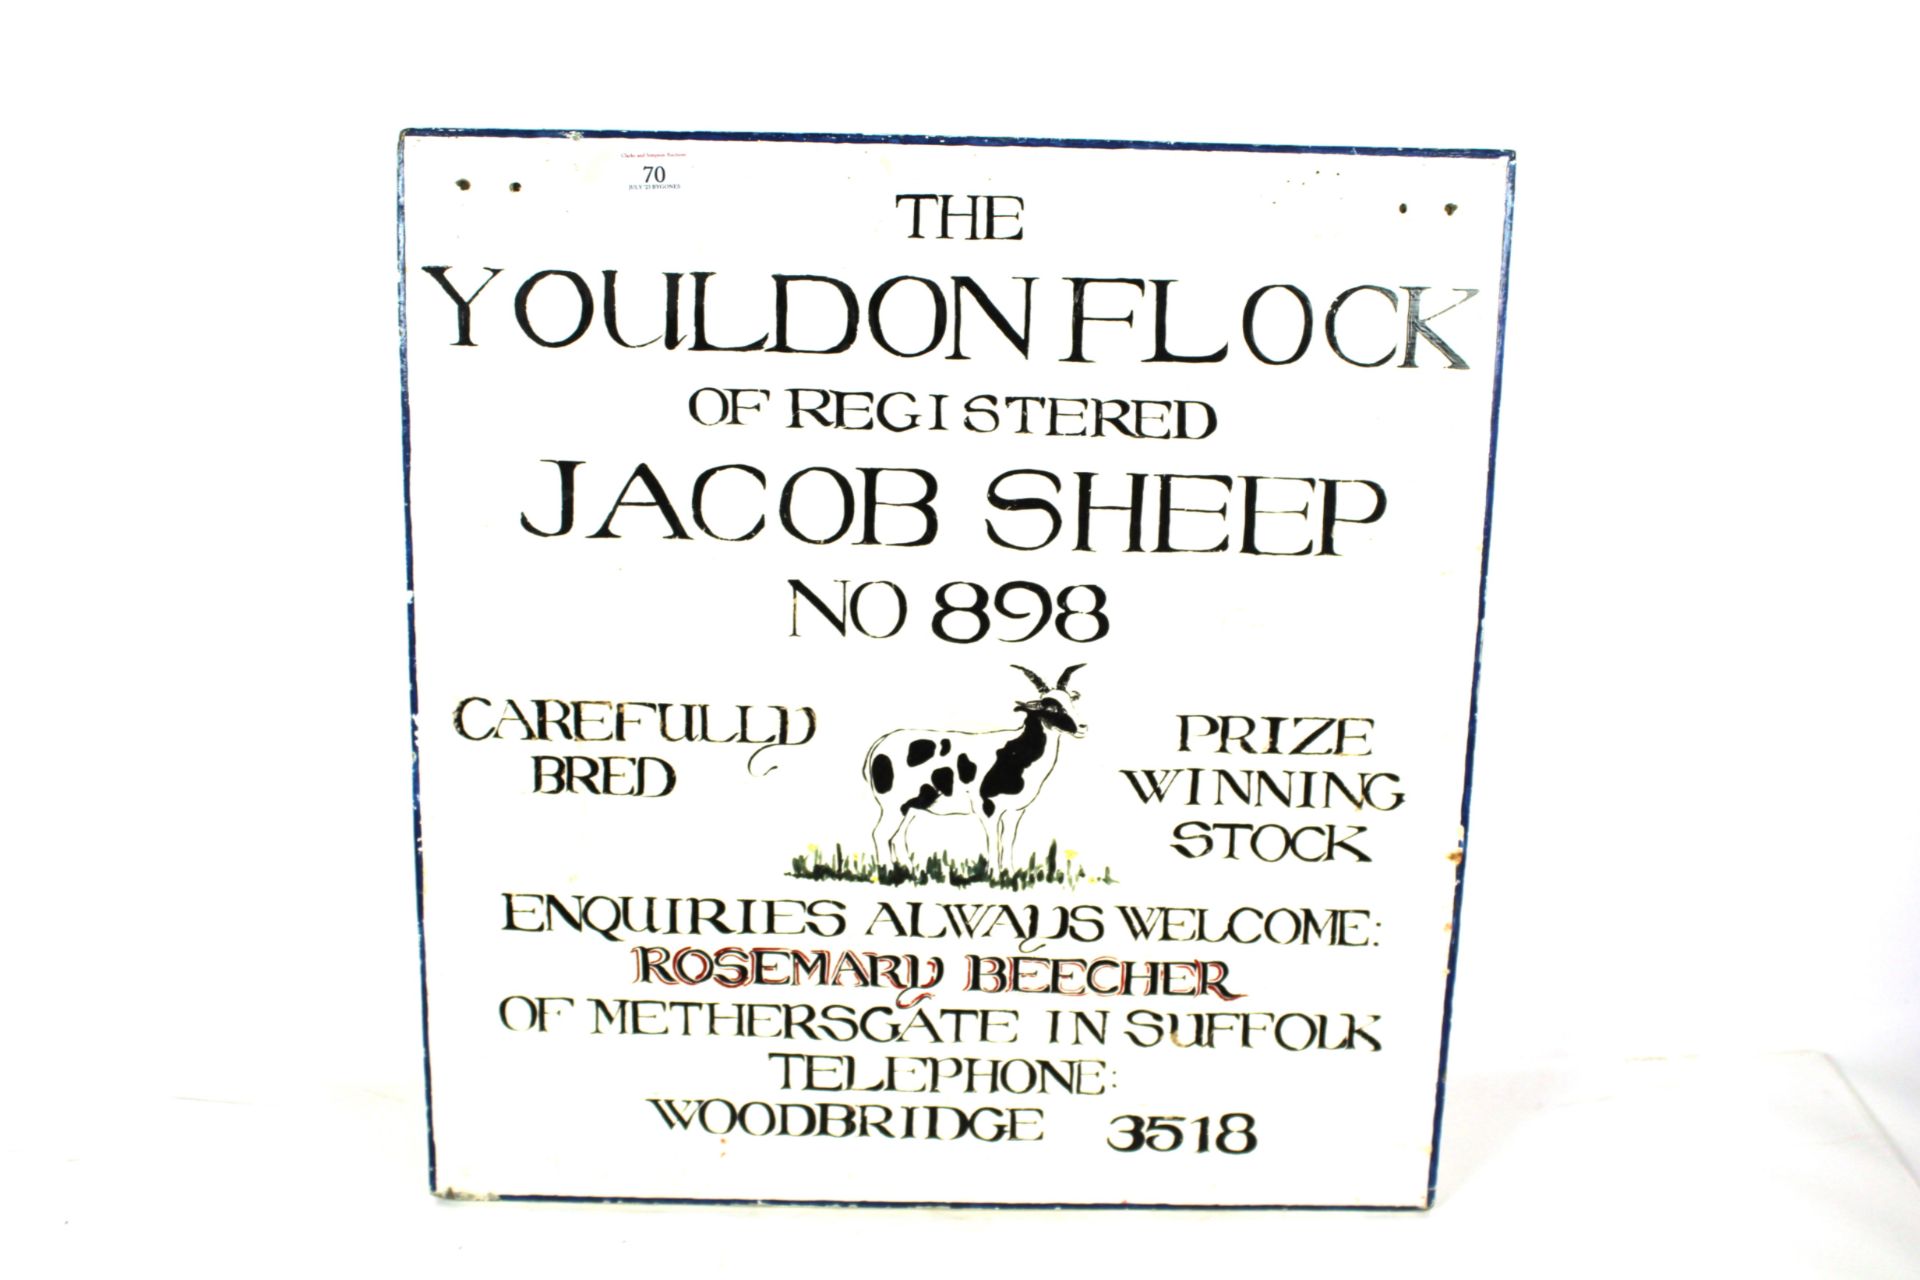 A painted wooden farm sign for the "Youldon Flock